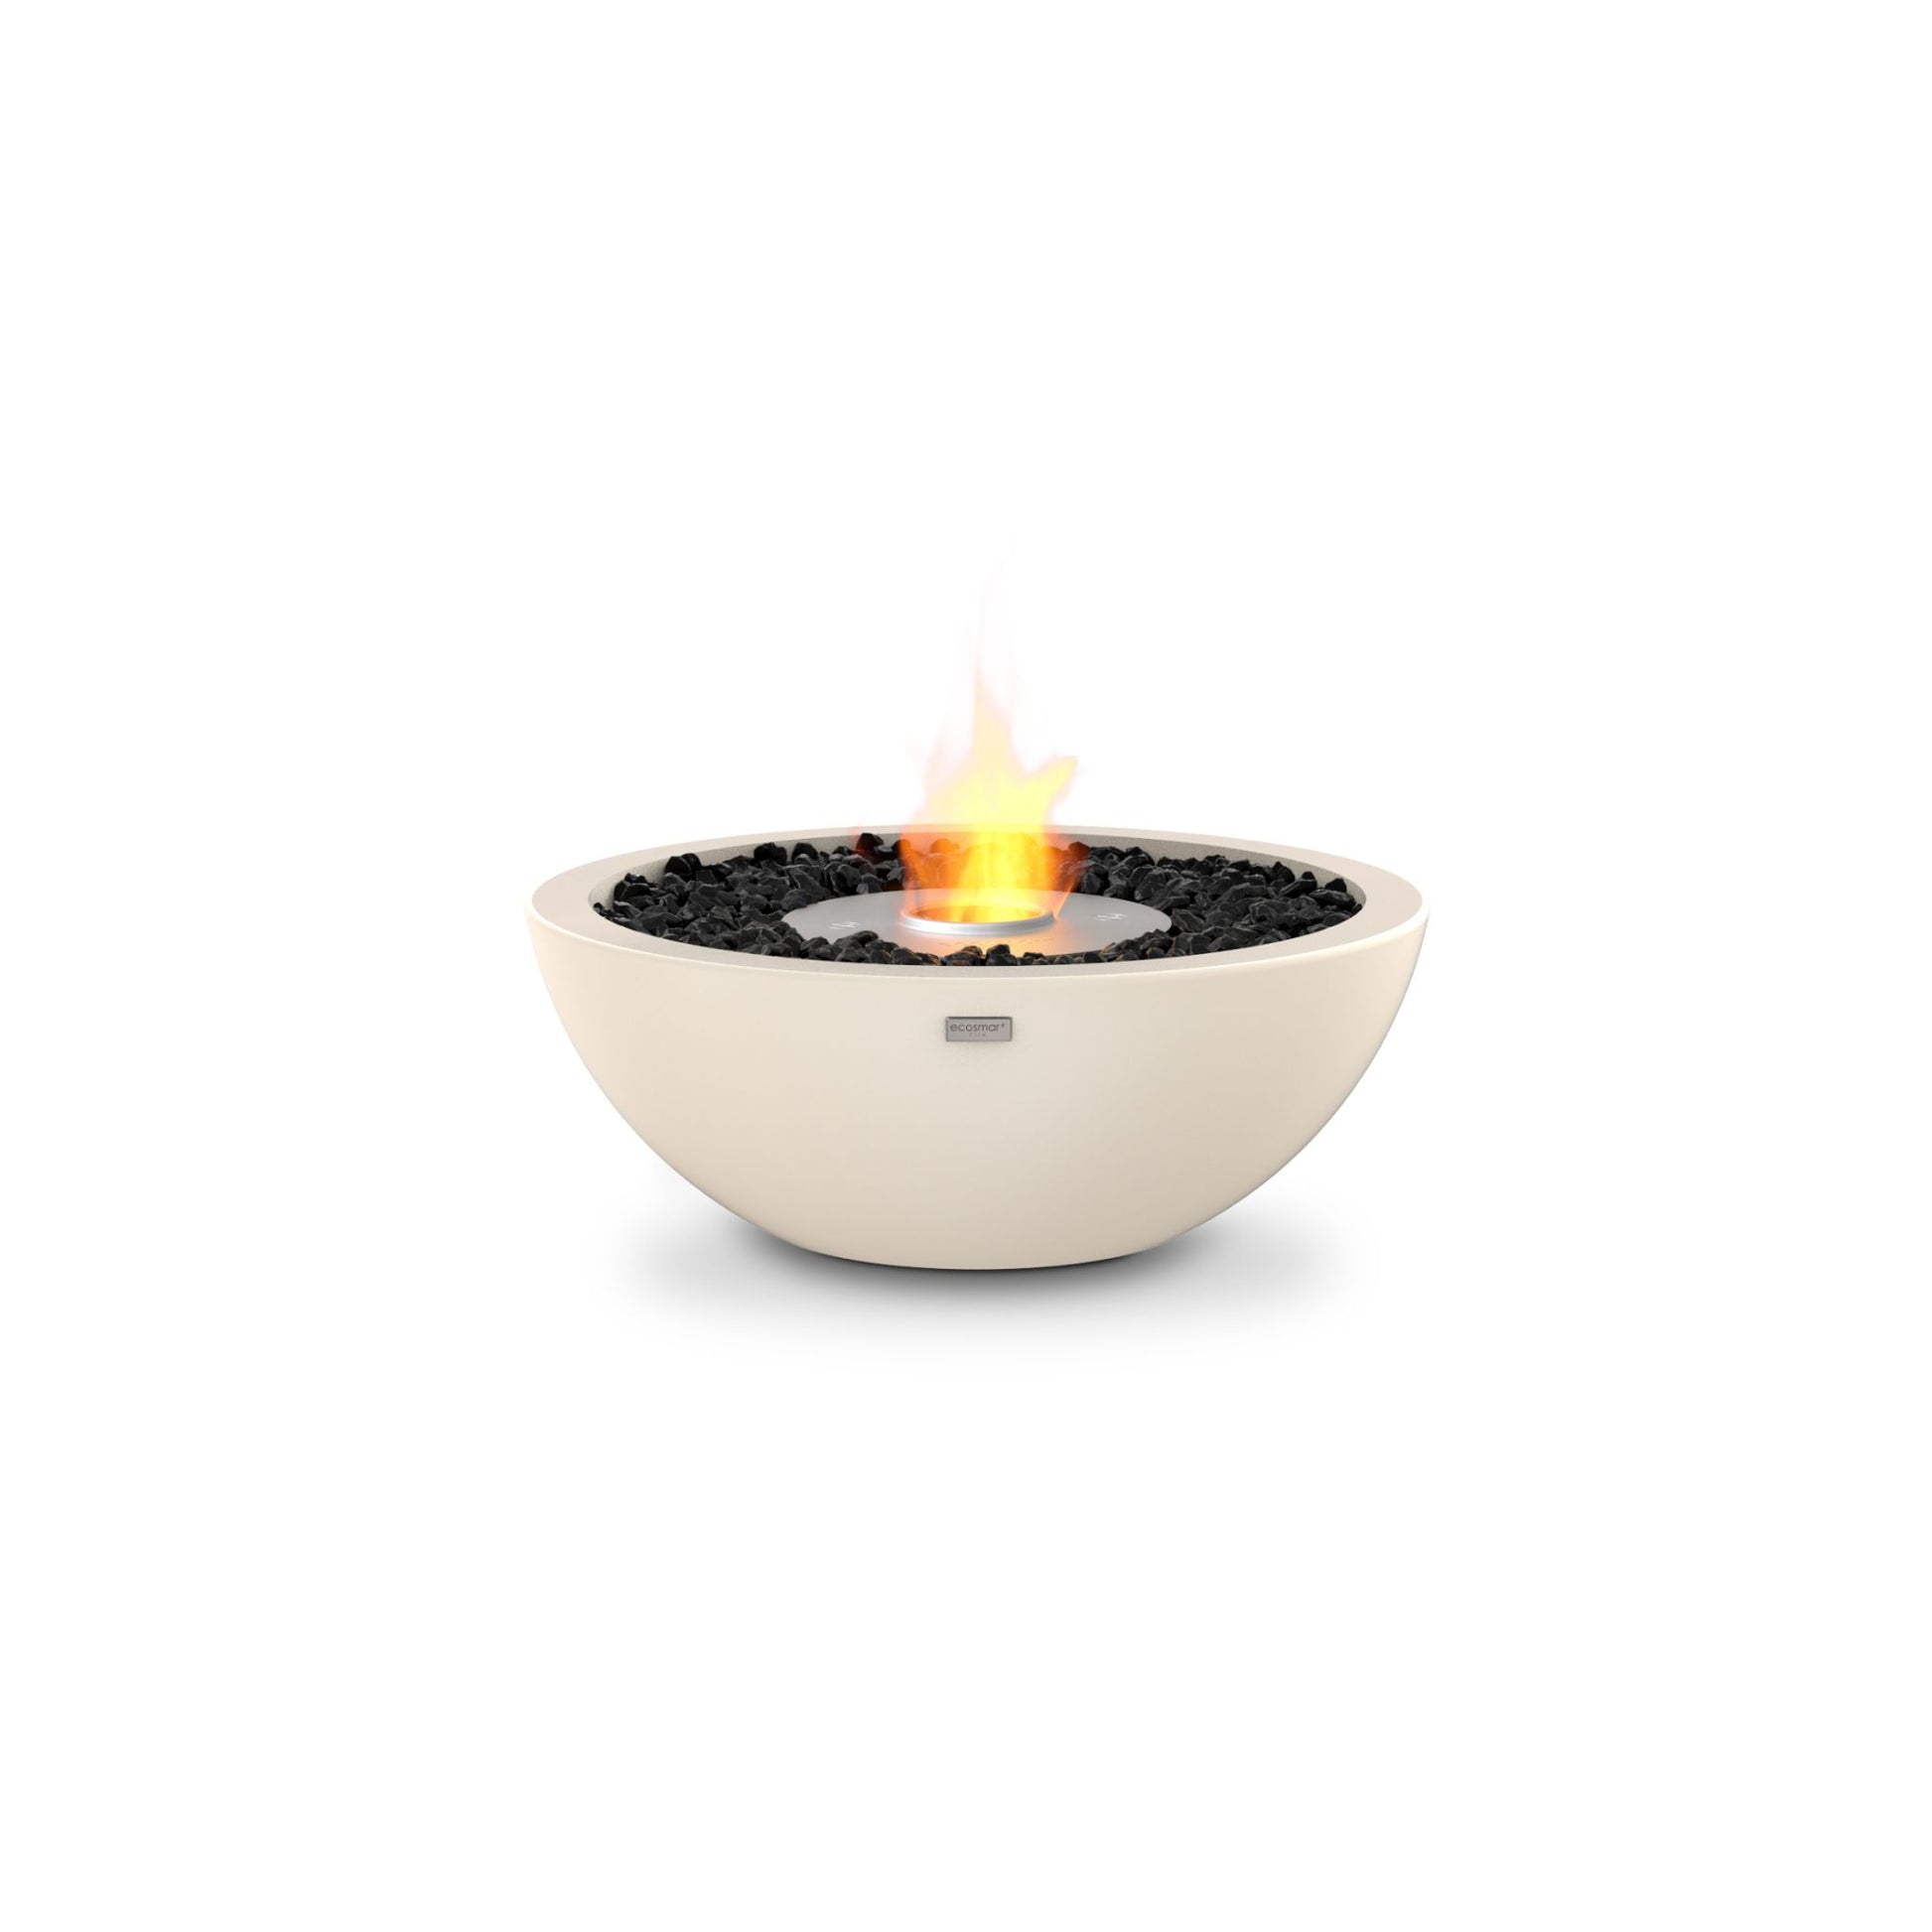 Ecosmart Fire Mix 600 bioethanol fire pit bowl in white concrete with stainless steel burner on a white background